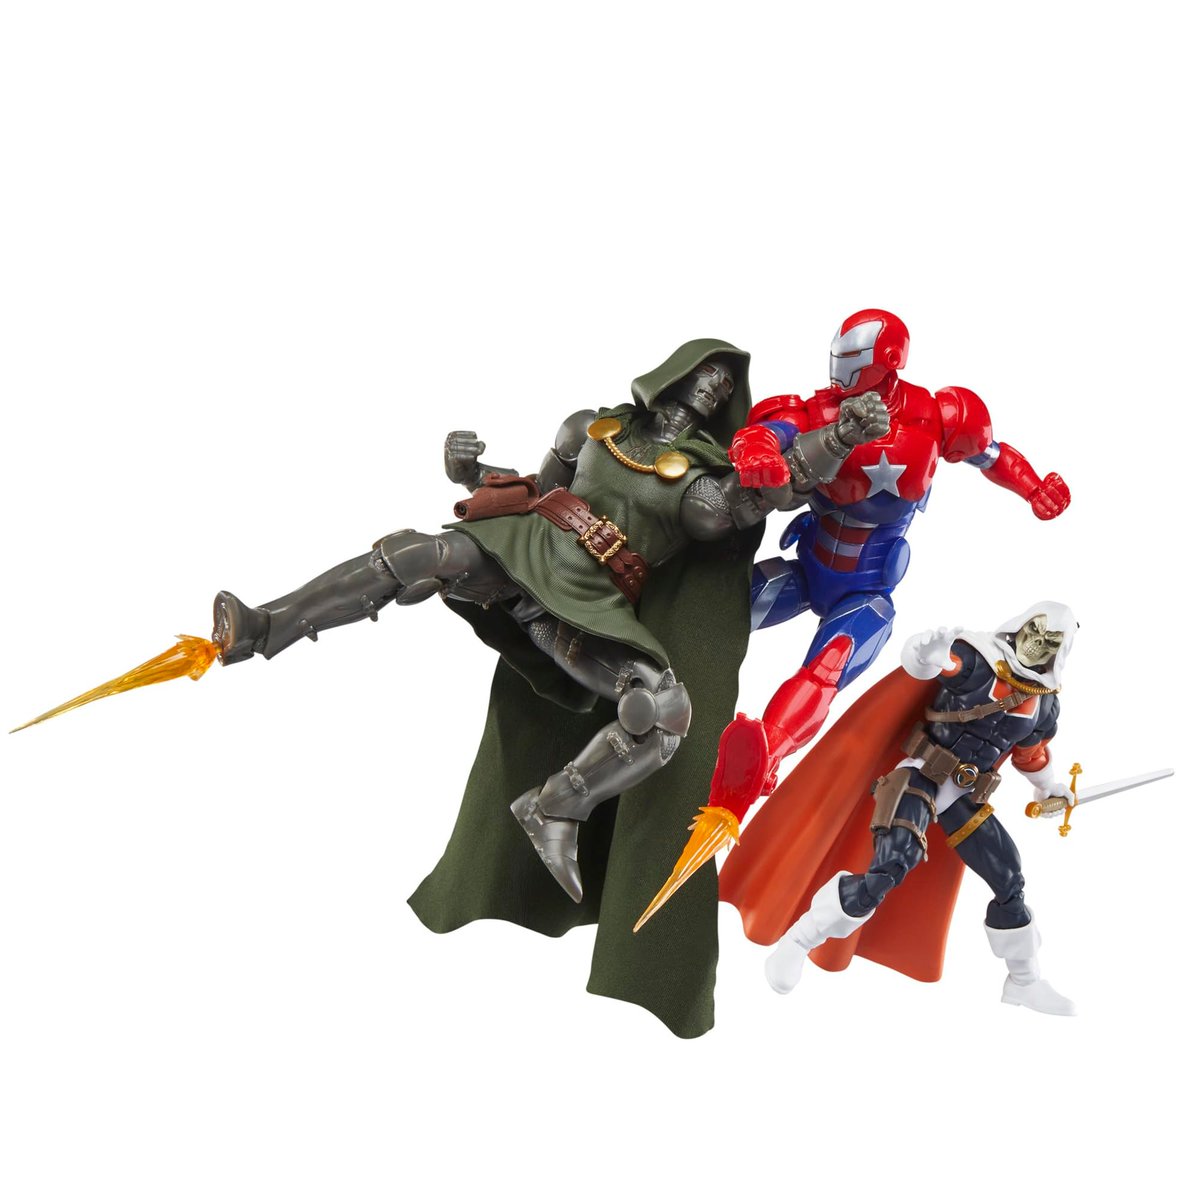 ⚠️💥ALERT💥⚠️ #Statoversians! 👁🌛👁 🫶 High-resolution product images of today's Amazon Ed Hasbro Marvel Legends Cabal sinister #actionfigure pack (Iron Patriot, Taskmaster, and Doctor Doom)! Preorder TOMMOROW (5/29) for ONLY ($74.99)! #marvellegends #toynews TSO'VIN!! -